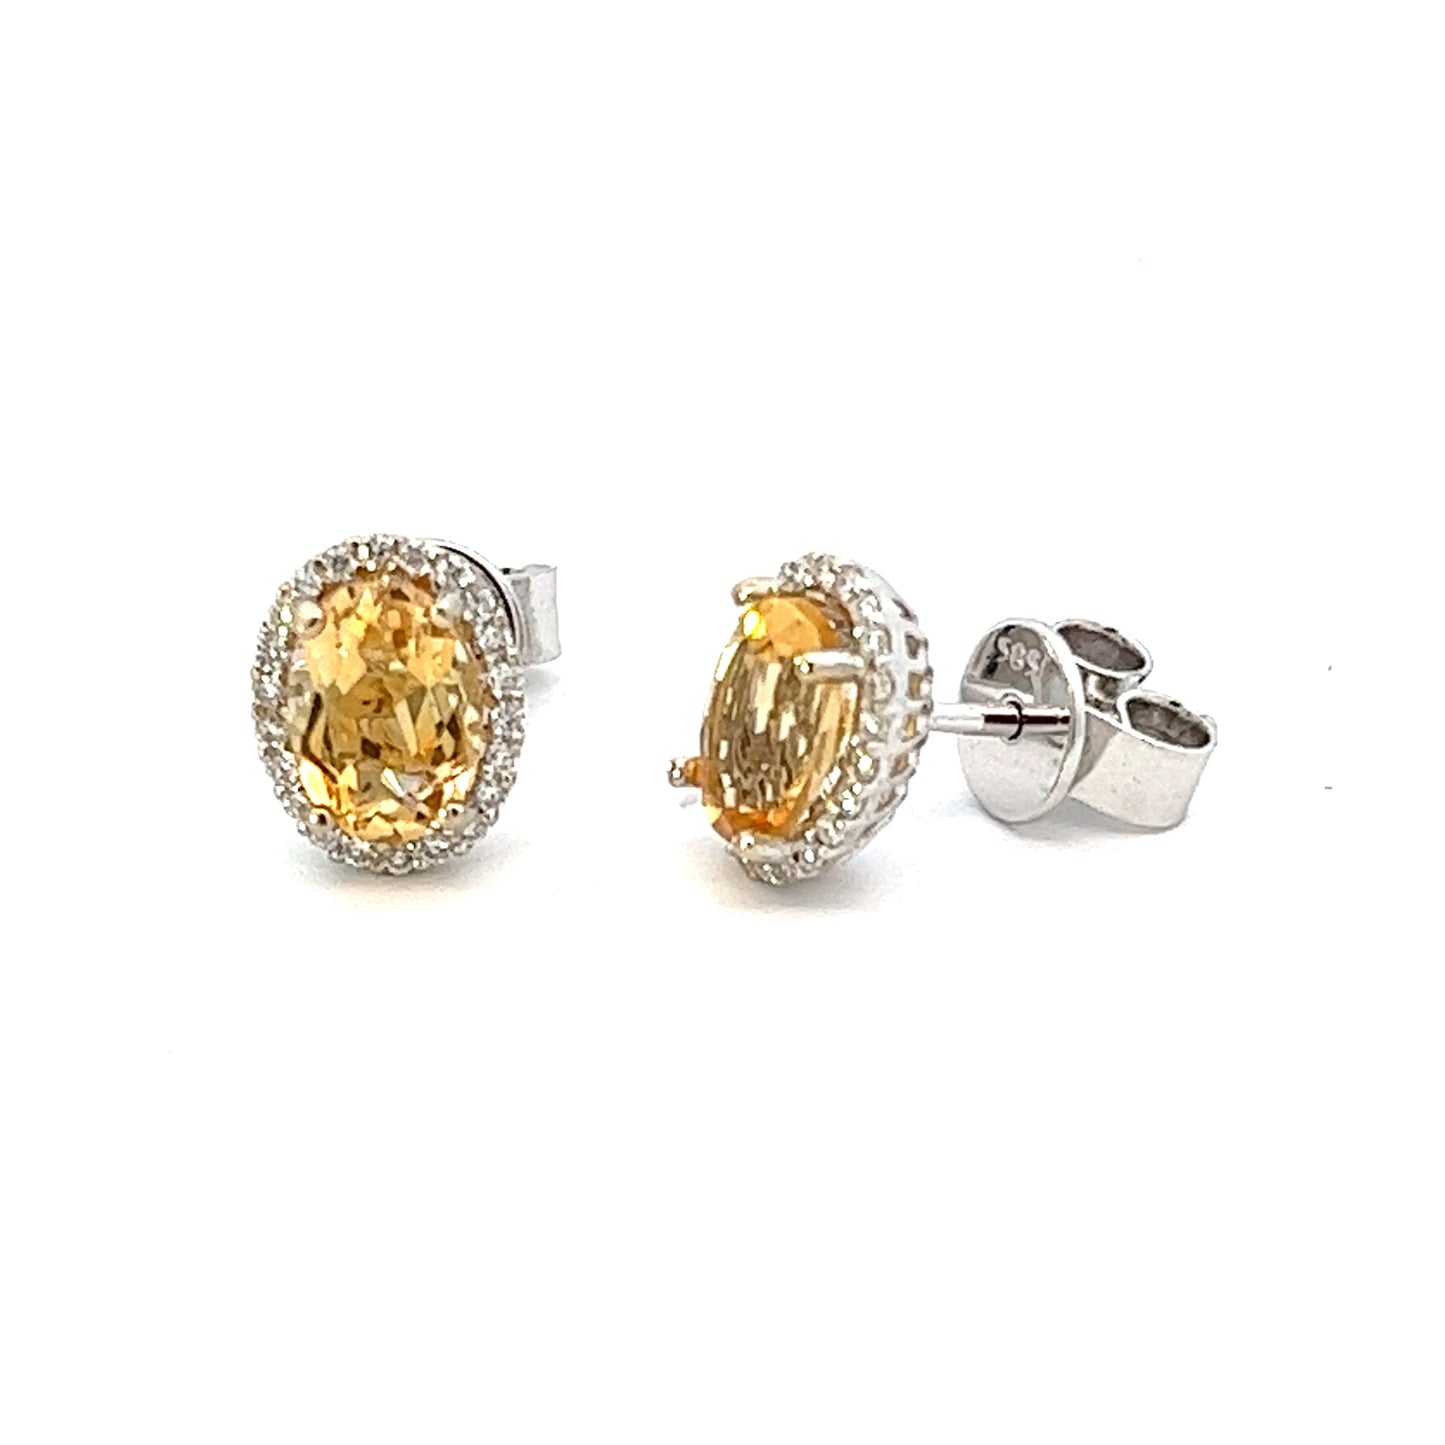 1.5ct total weight yellow sapphire and  1/4ct total weight round diamond earrings